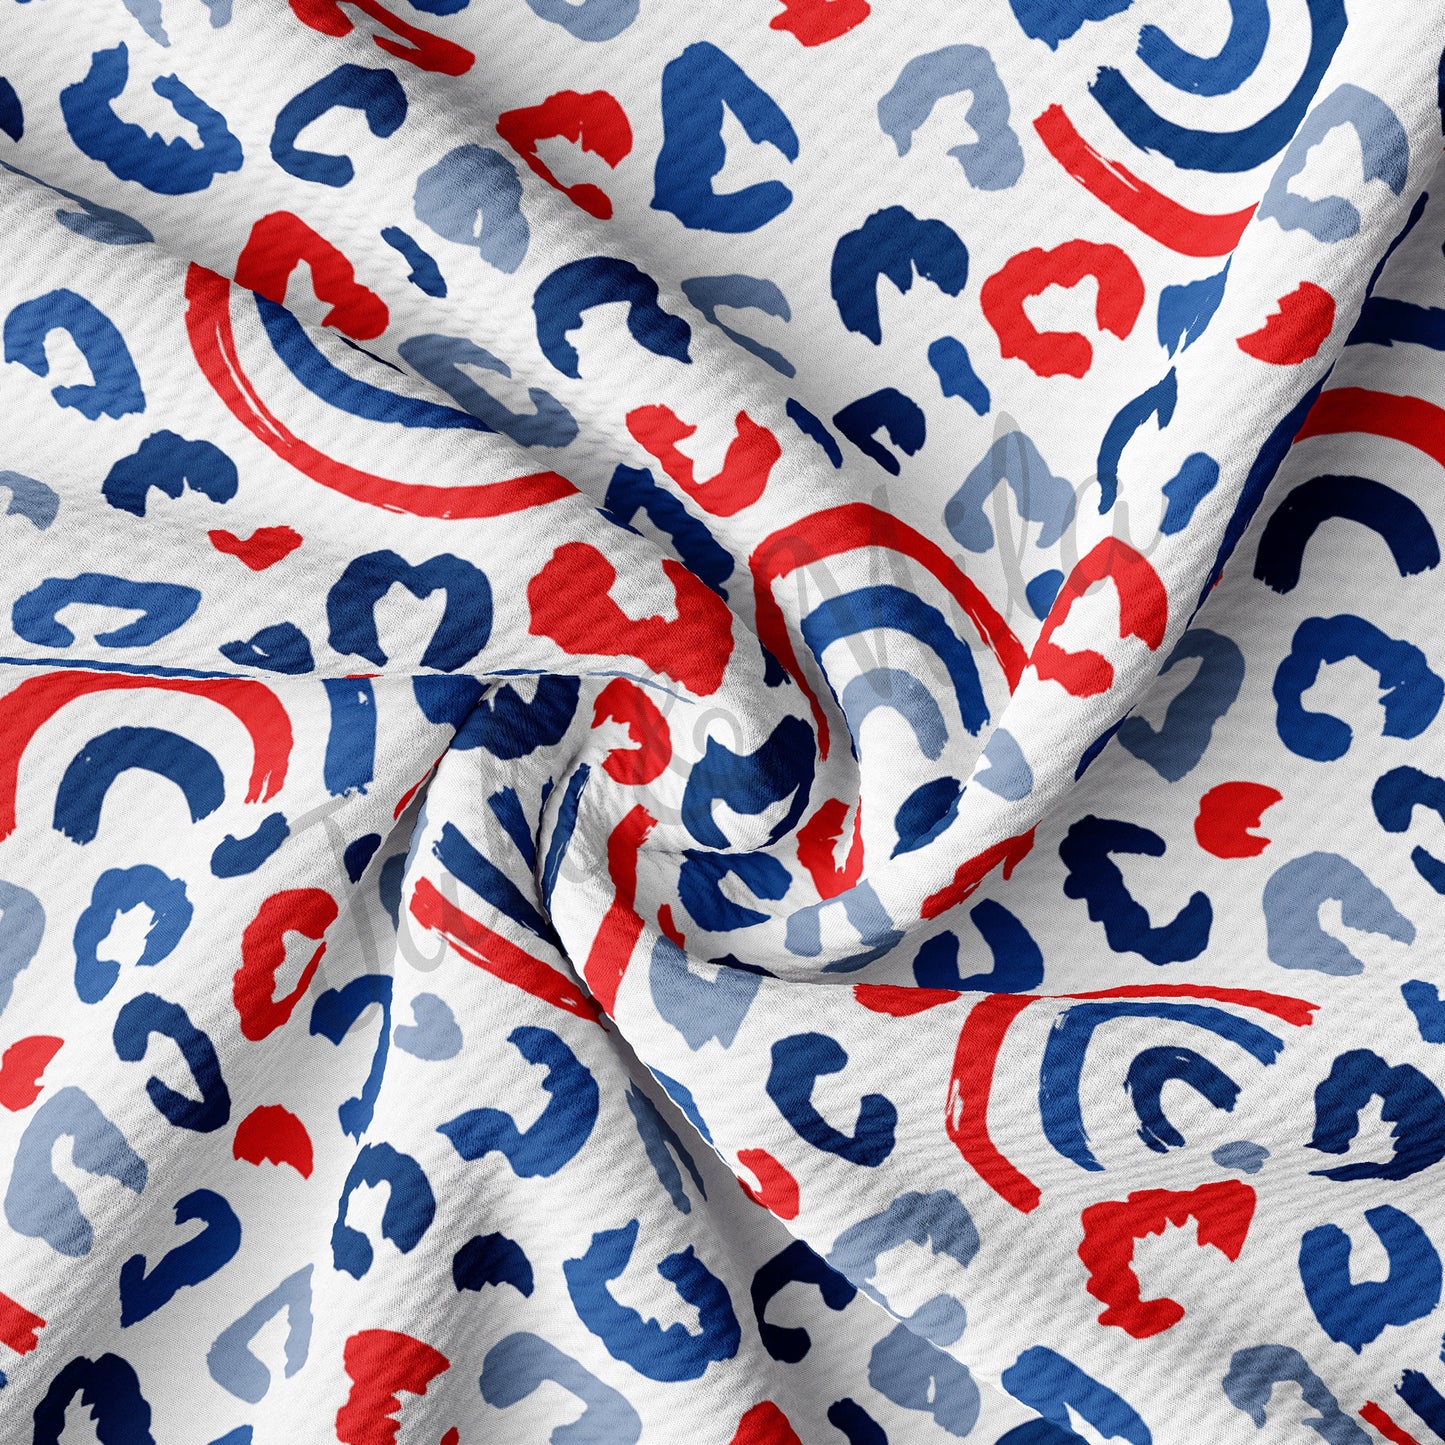 4th of July Patriotic USA Bullet Fabric PT91